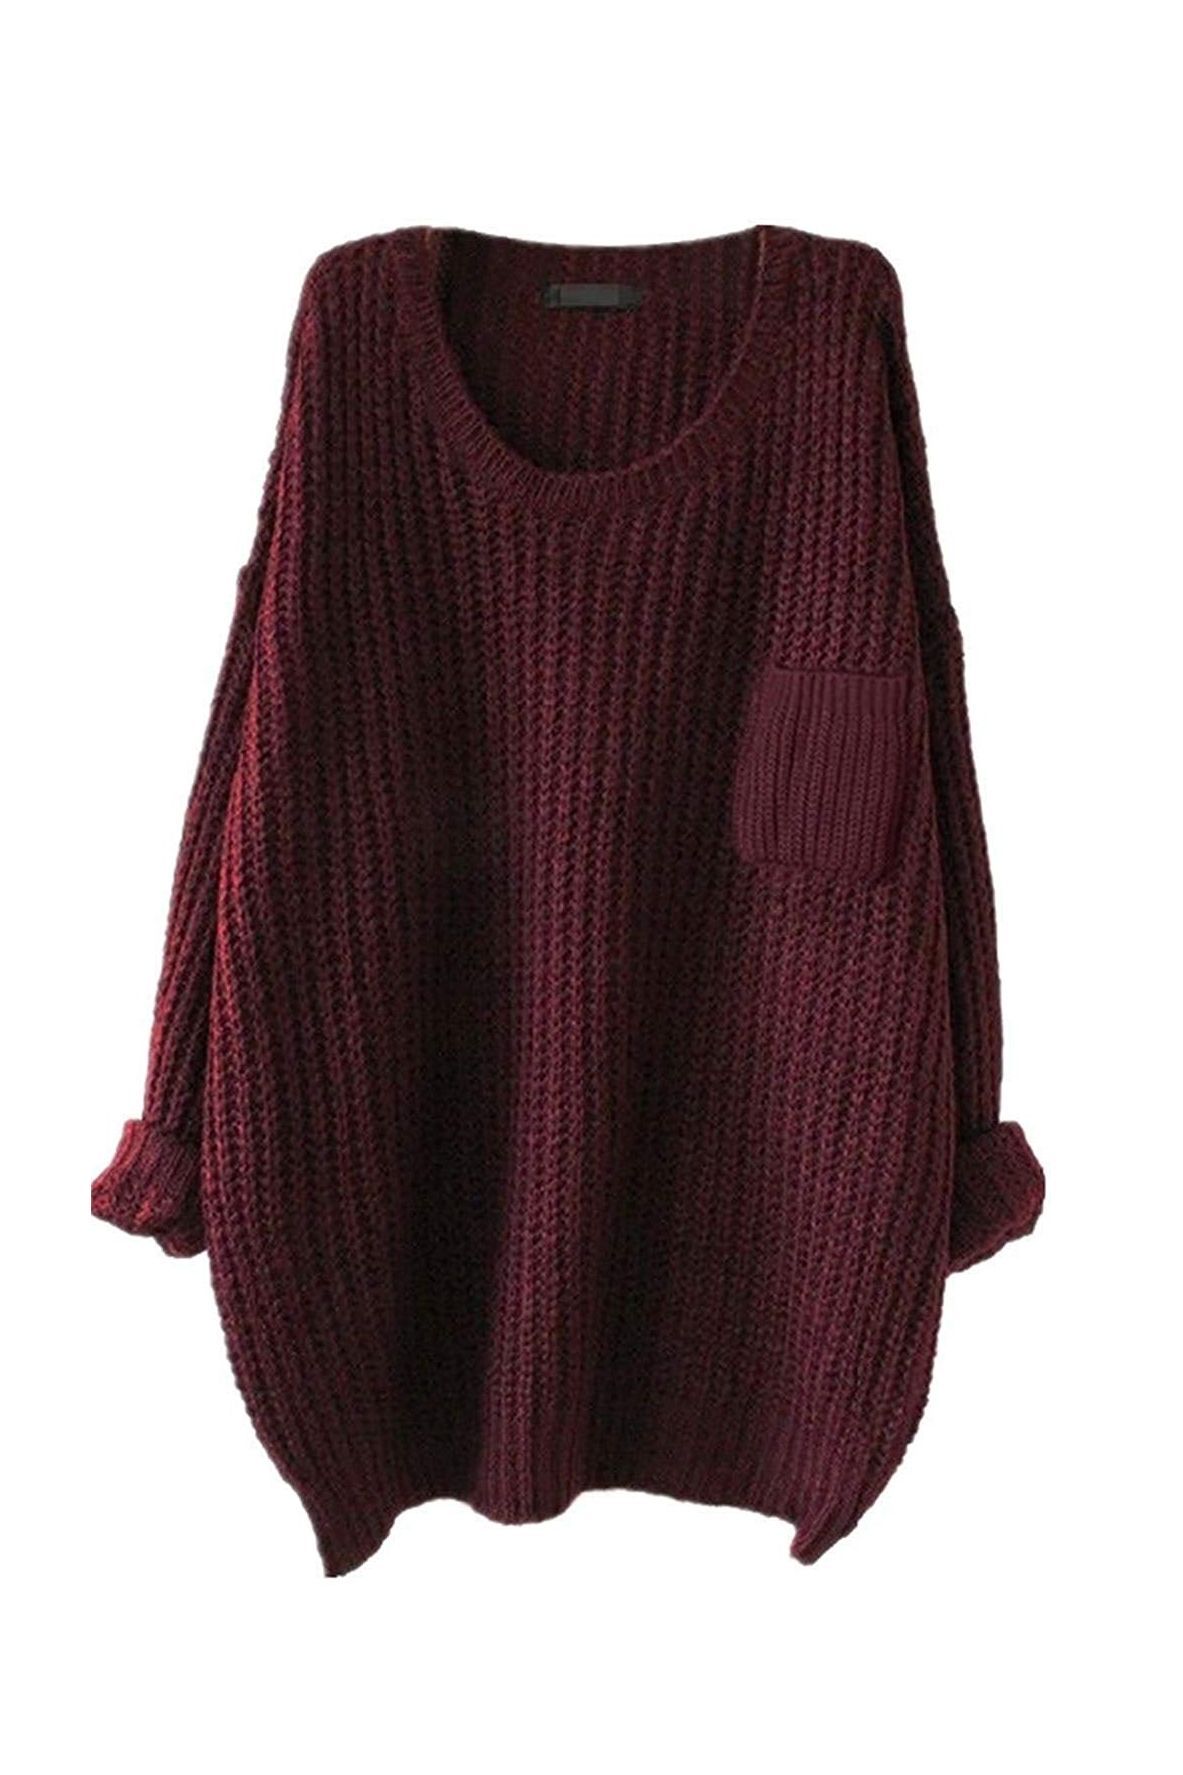 woolen sweaters for old womens